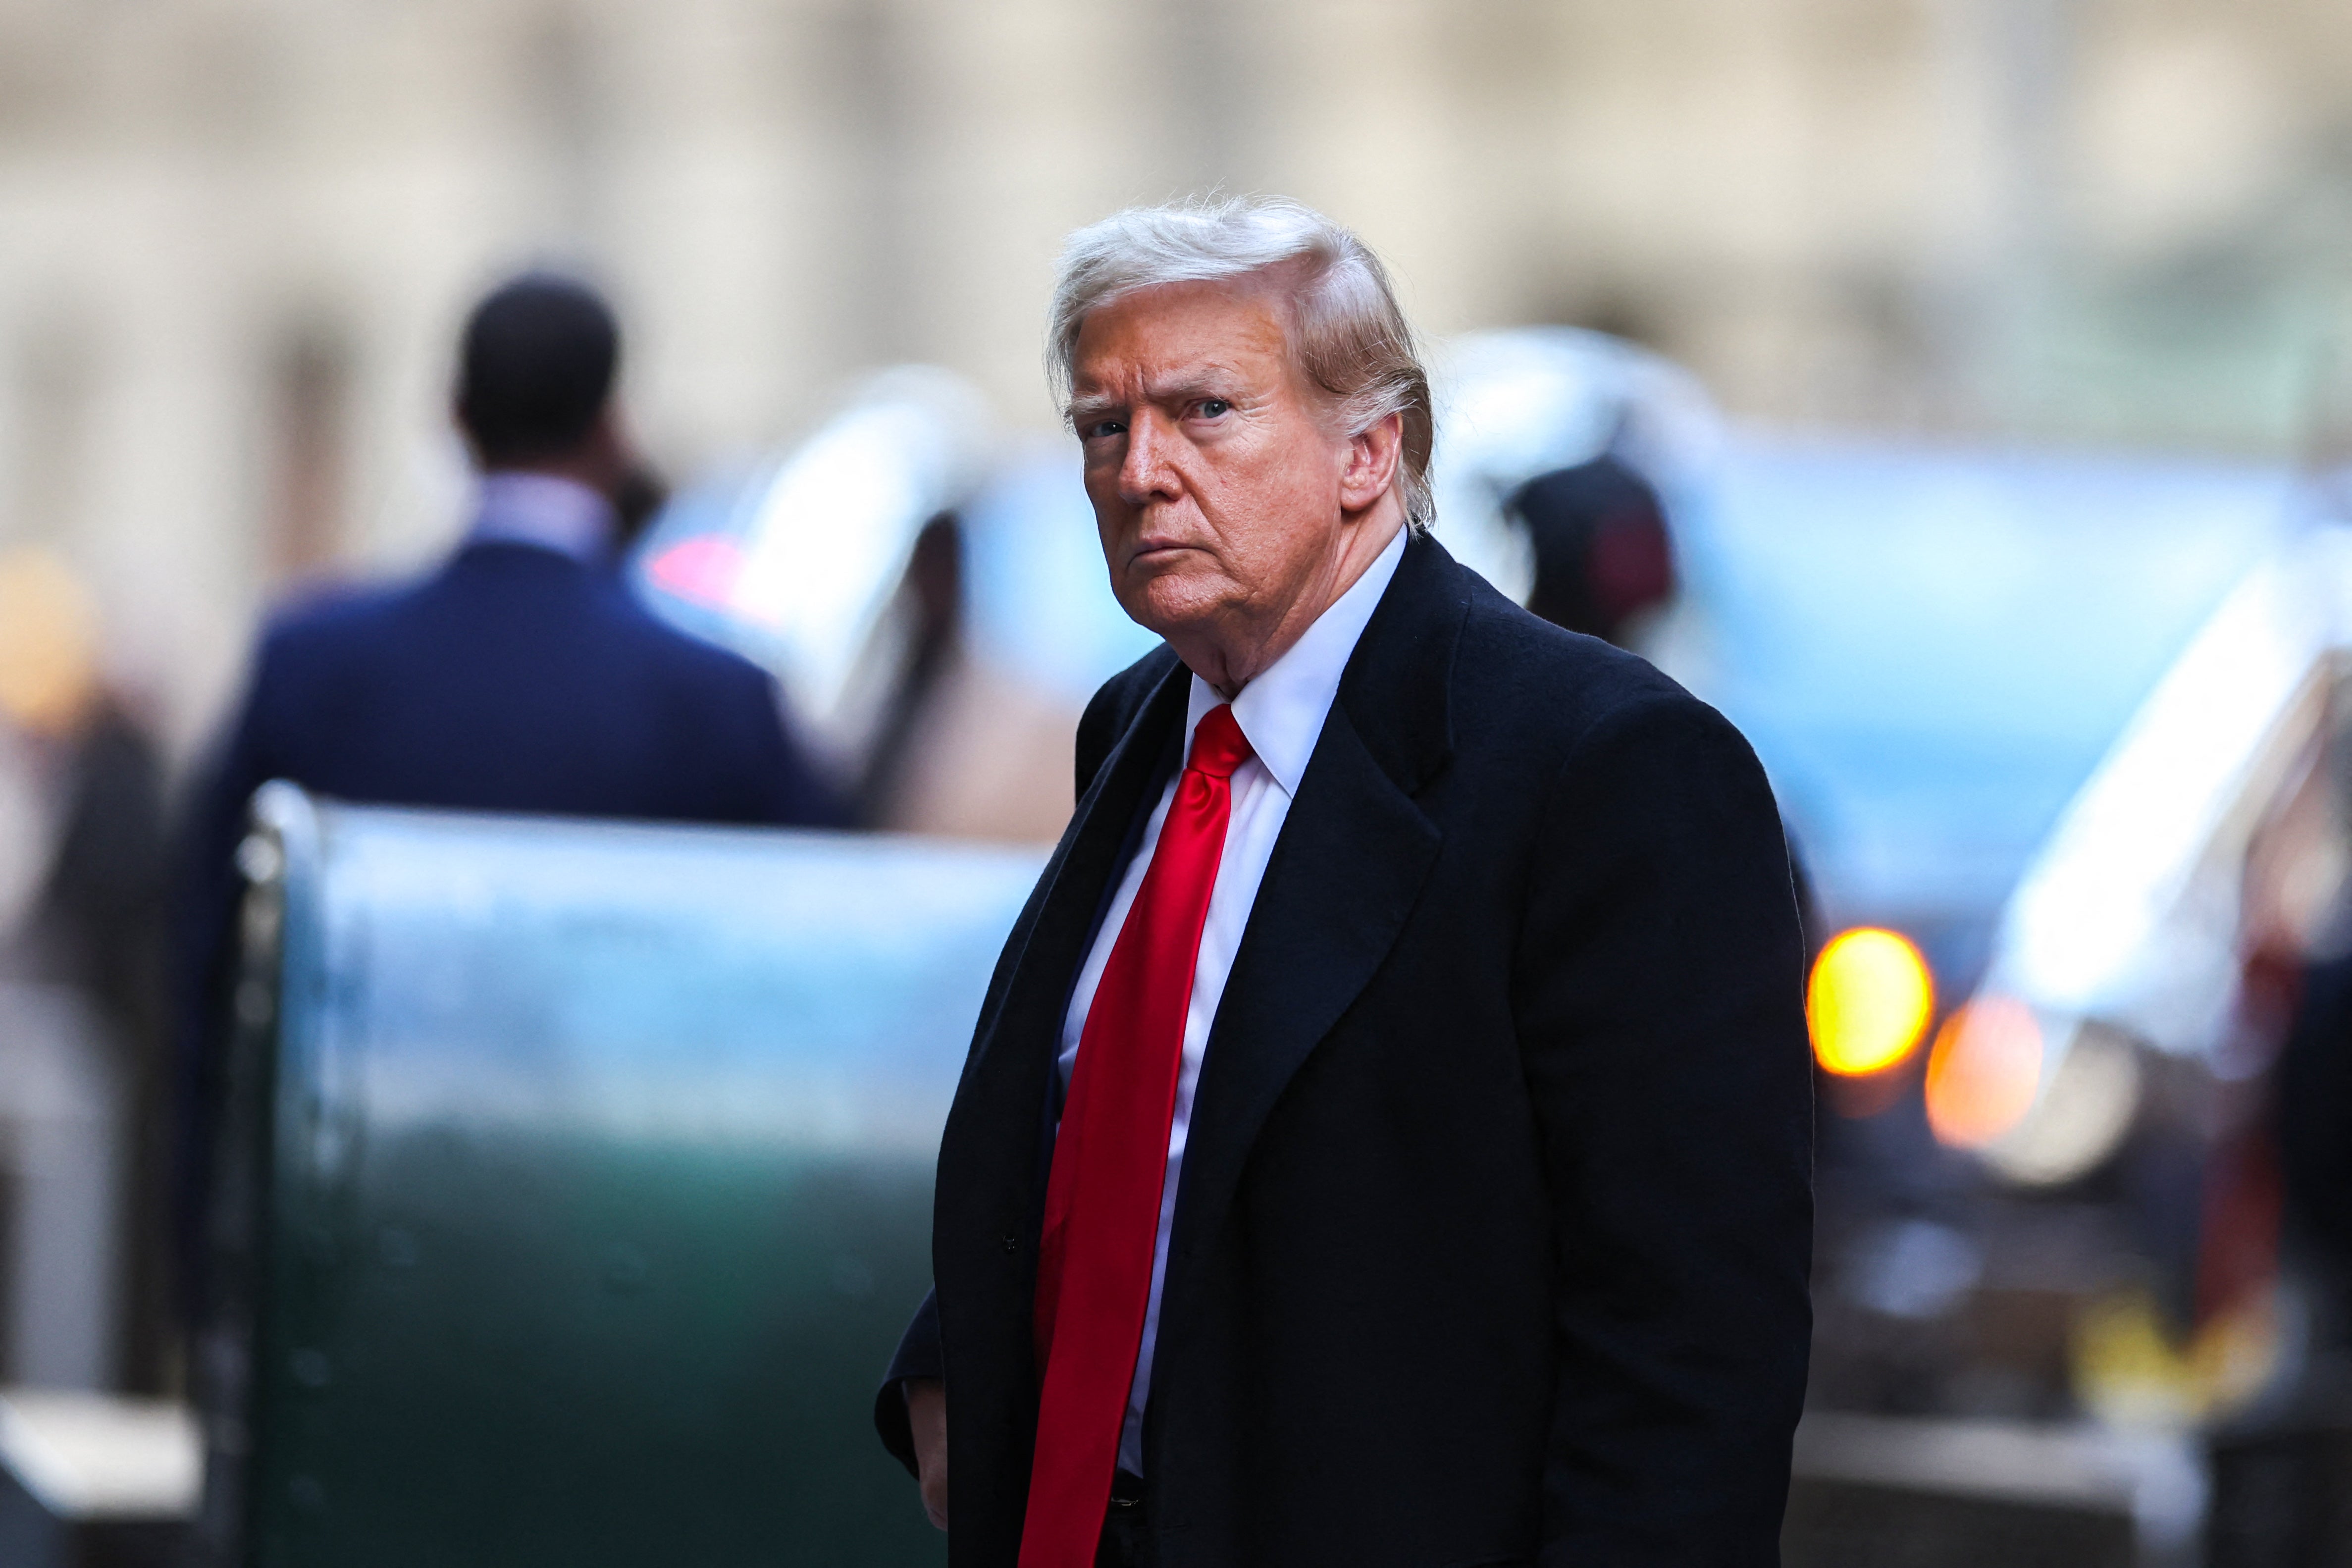 Donald Trump arrives at 40 Wall Street after a pretrial conference in Manhattan criminal court on 25 March.